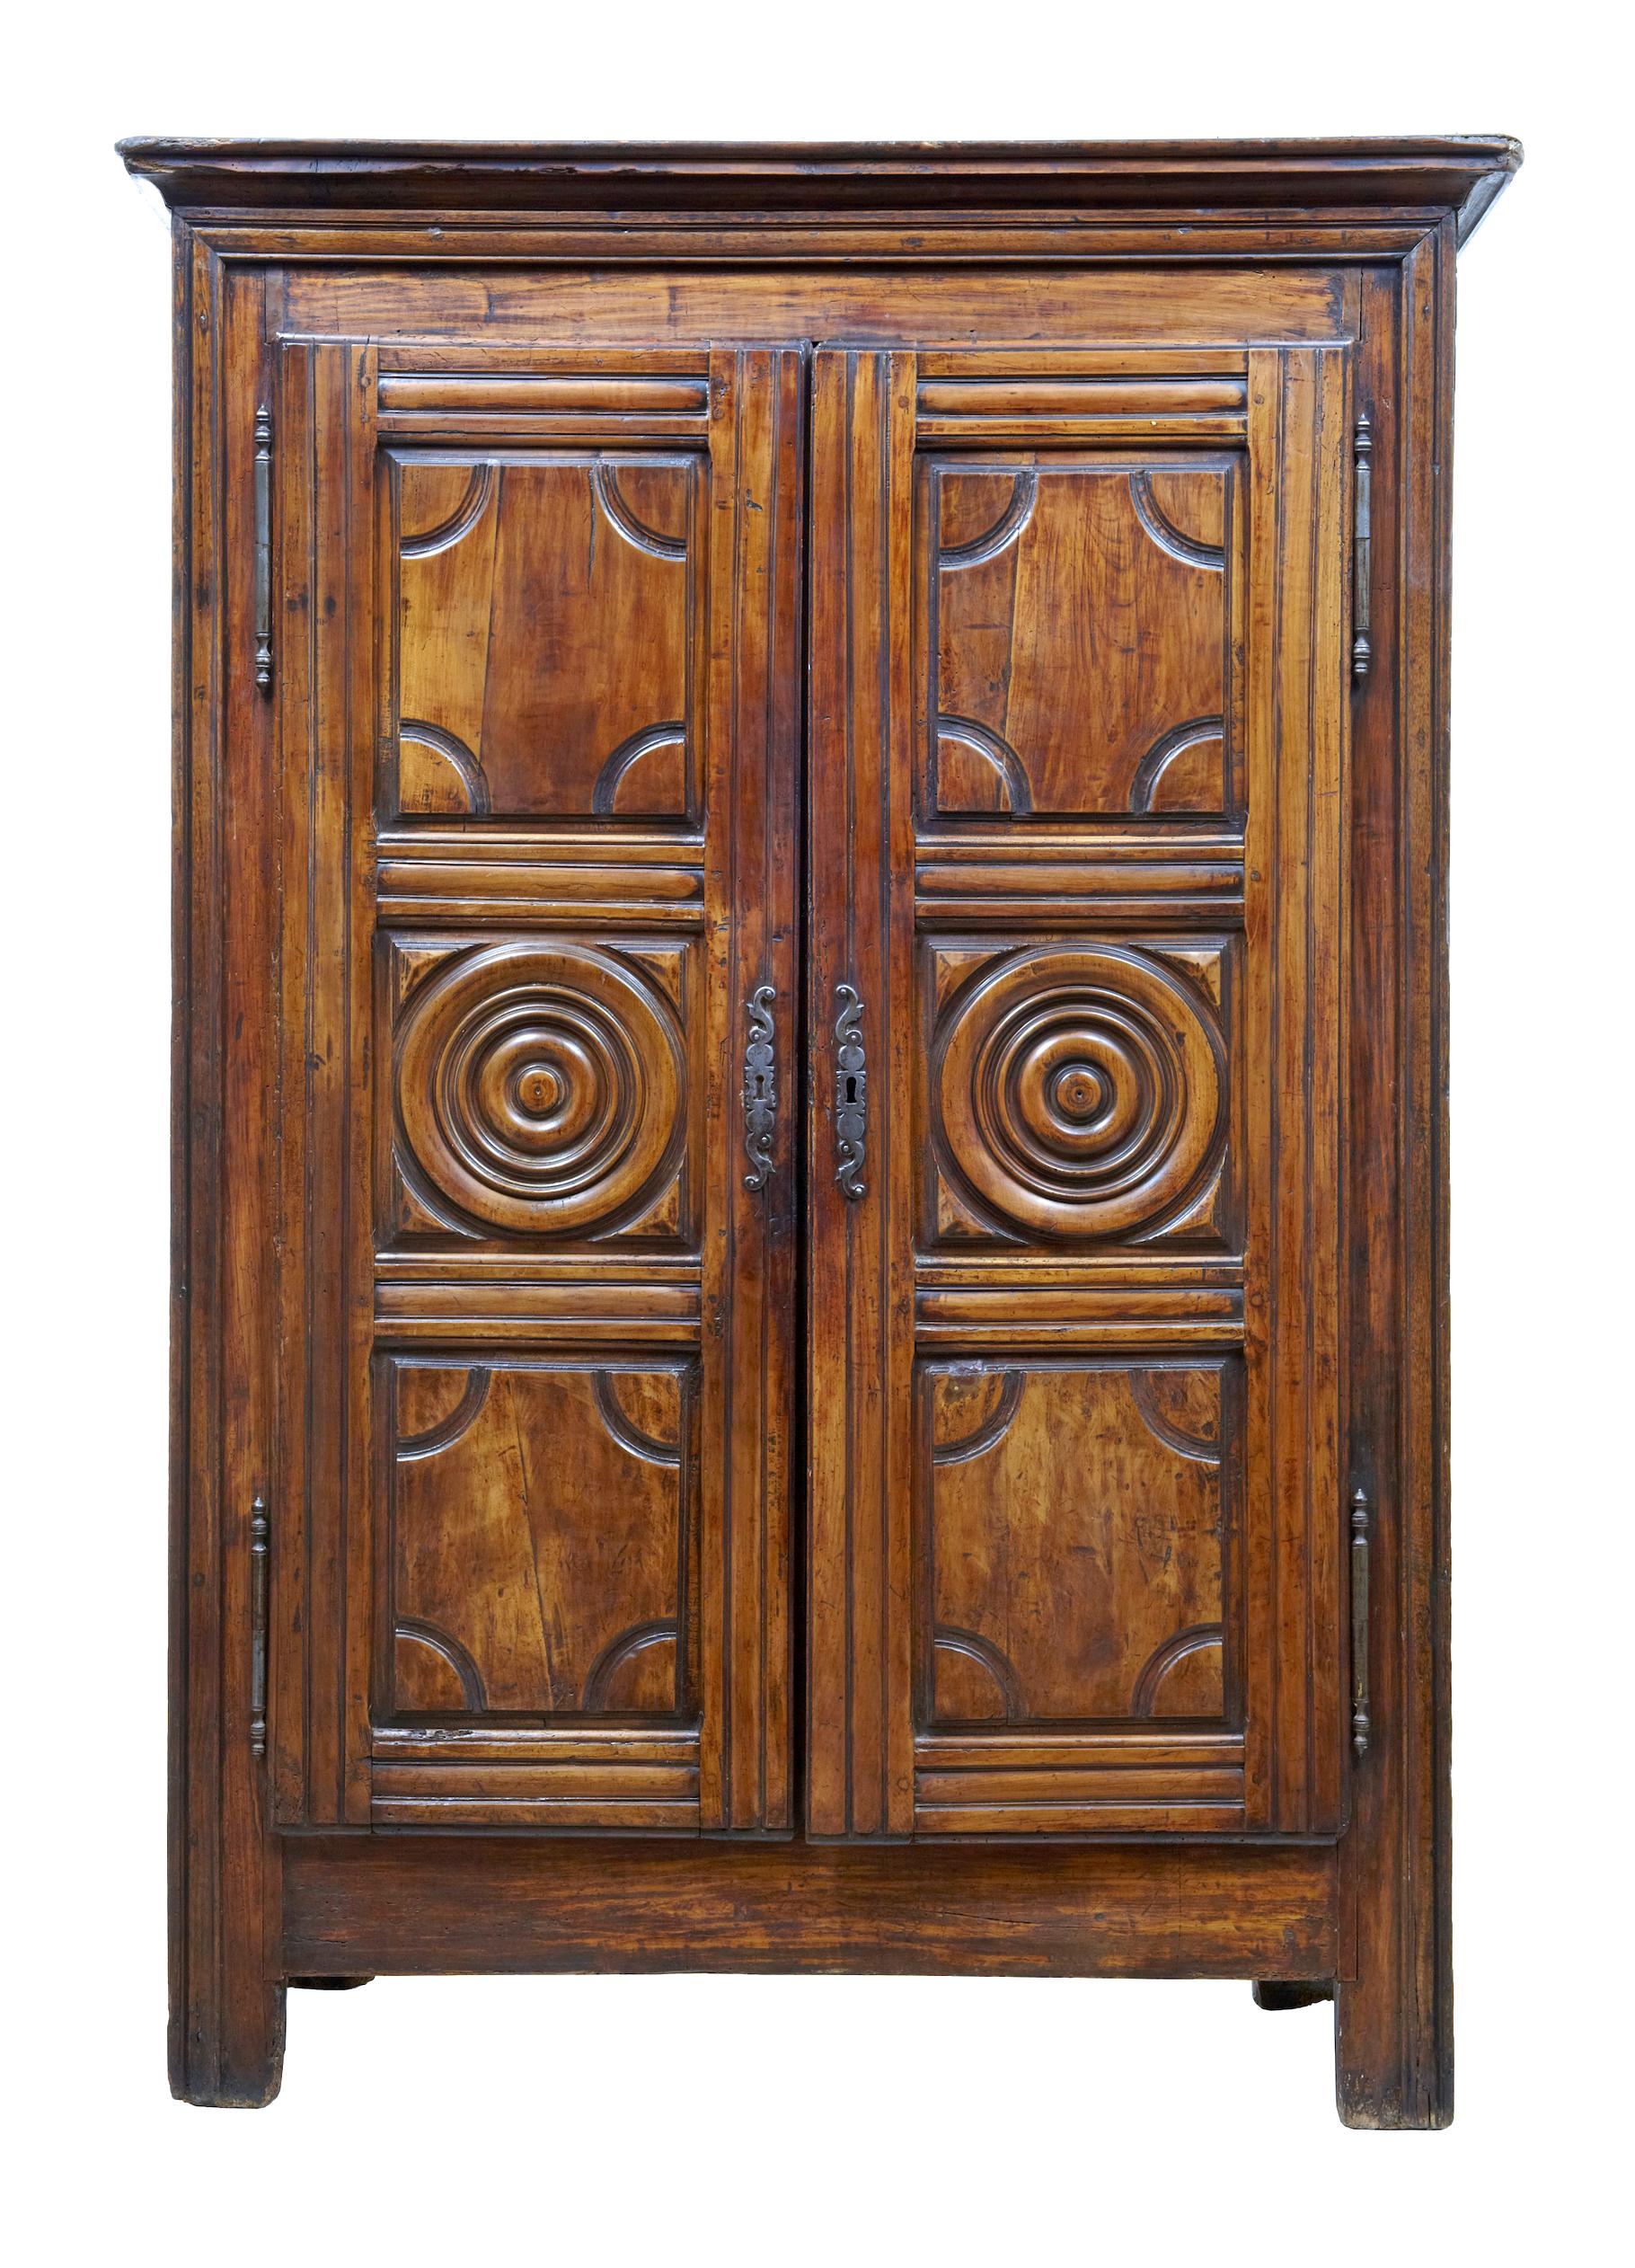 Original French fruitwood armoire, circa 1780. 

This French armoire would make an ideal tv unit or for its intended use. Original hinges and escutheons, double doors open up to reveal and interior of a small tapered shelf at the top, followed by